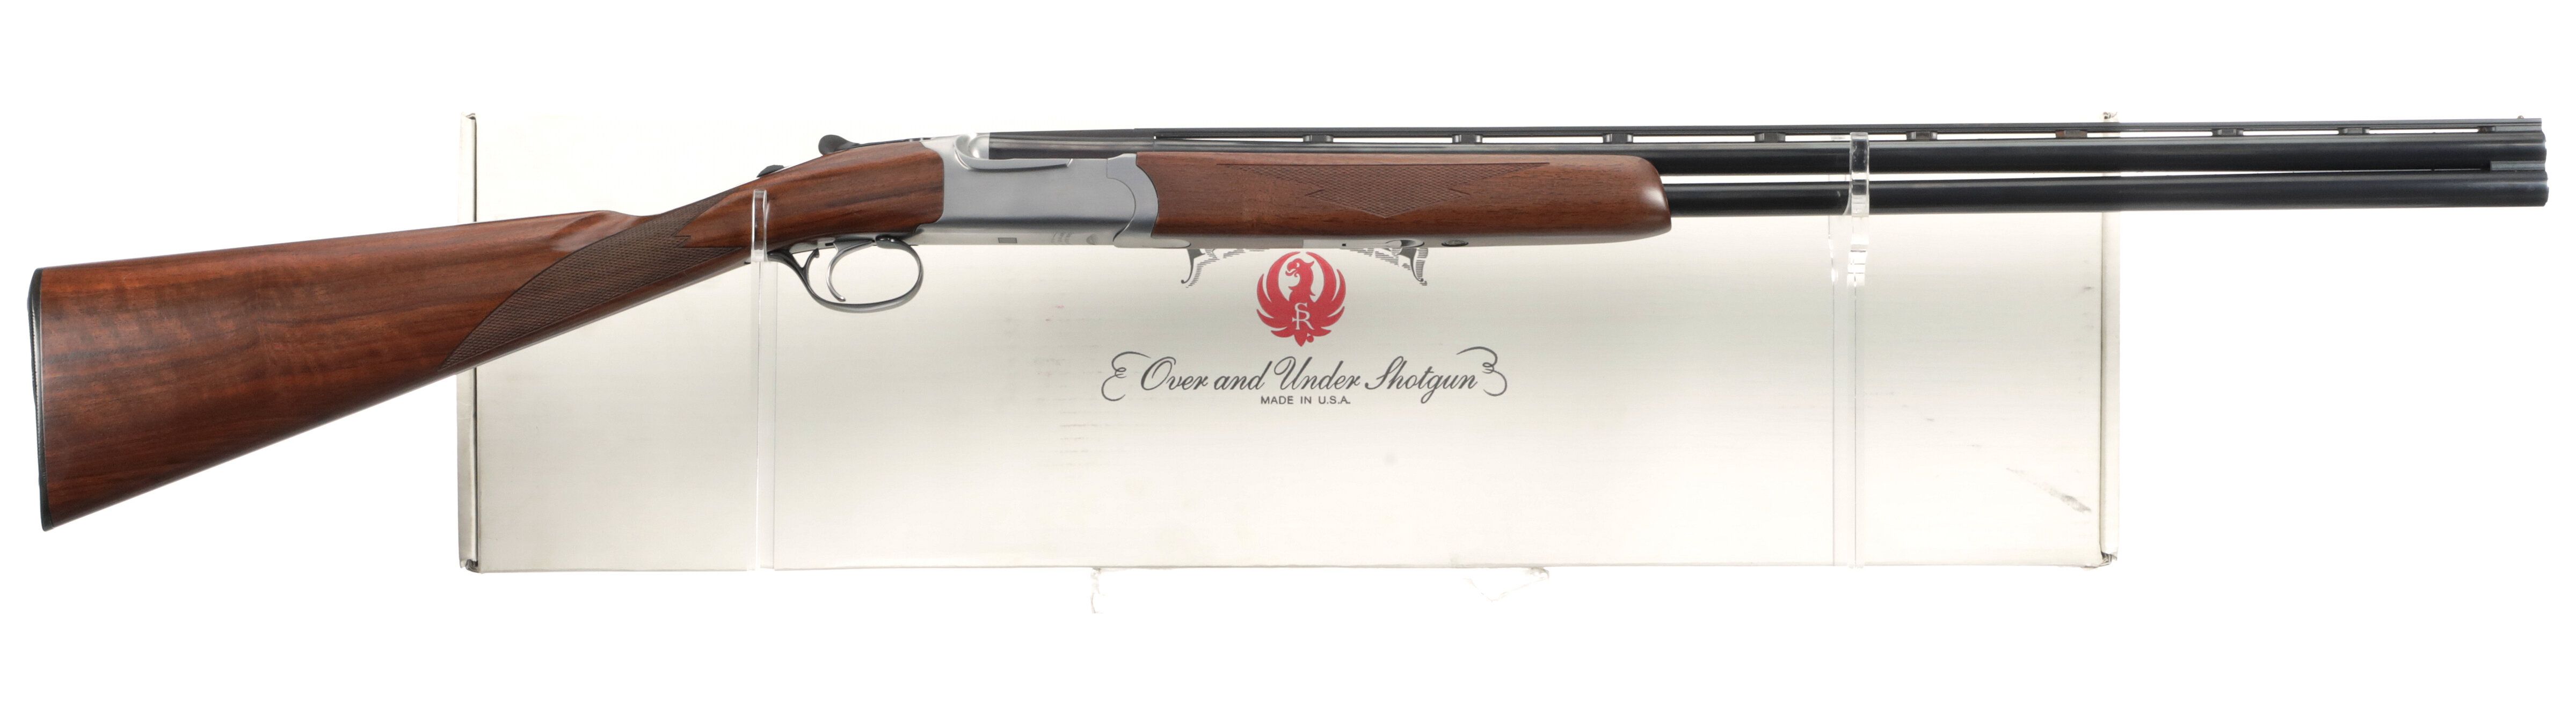 Ruger Red Over/Under 28 Gauge with Box | Island Auction